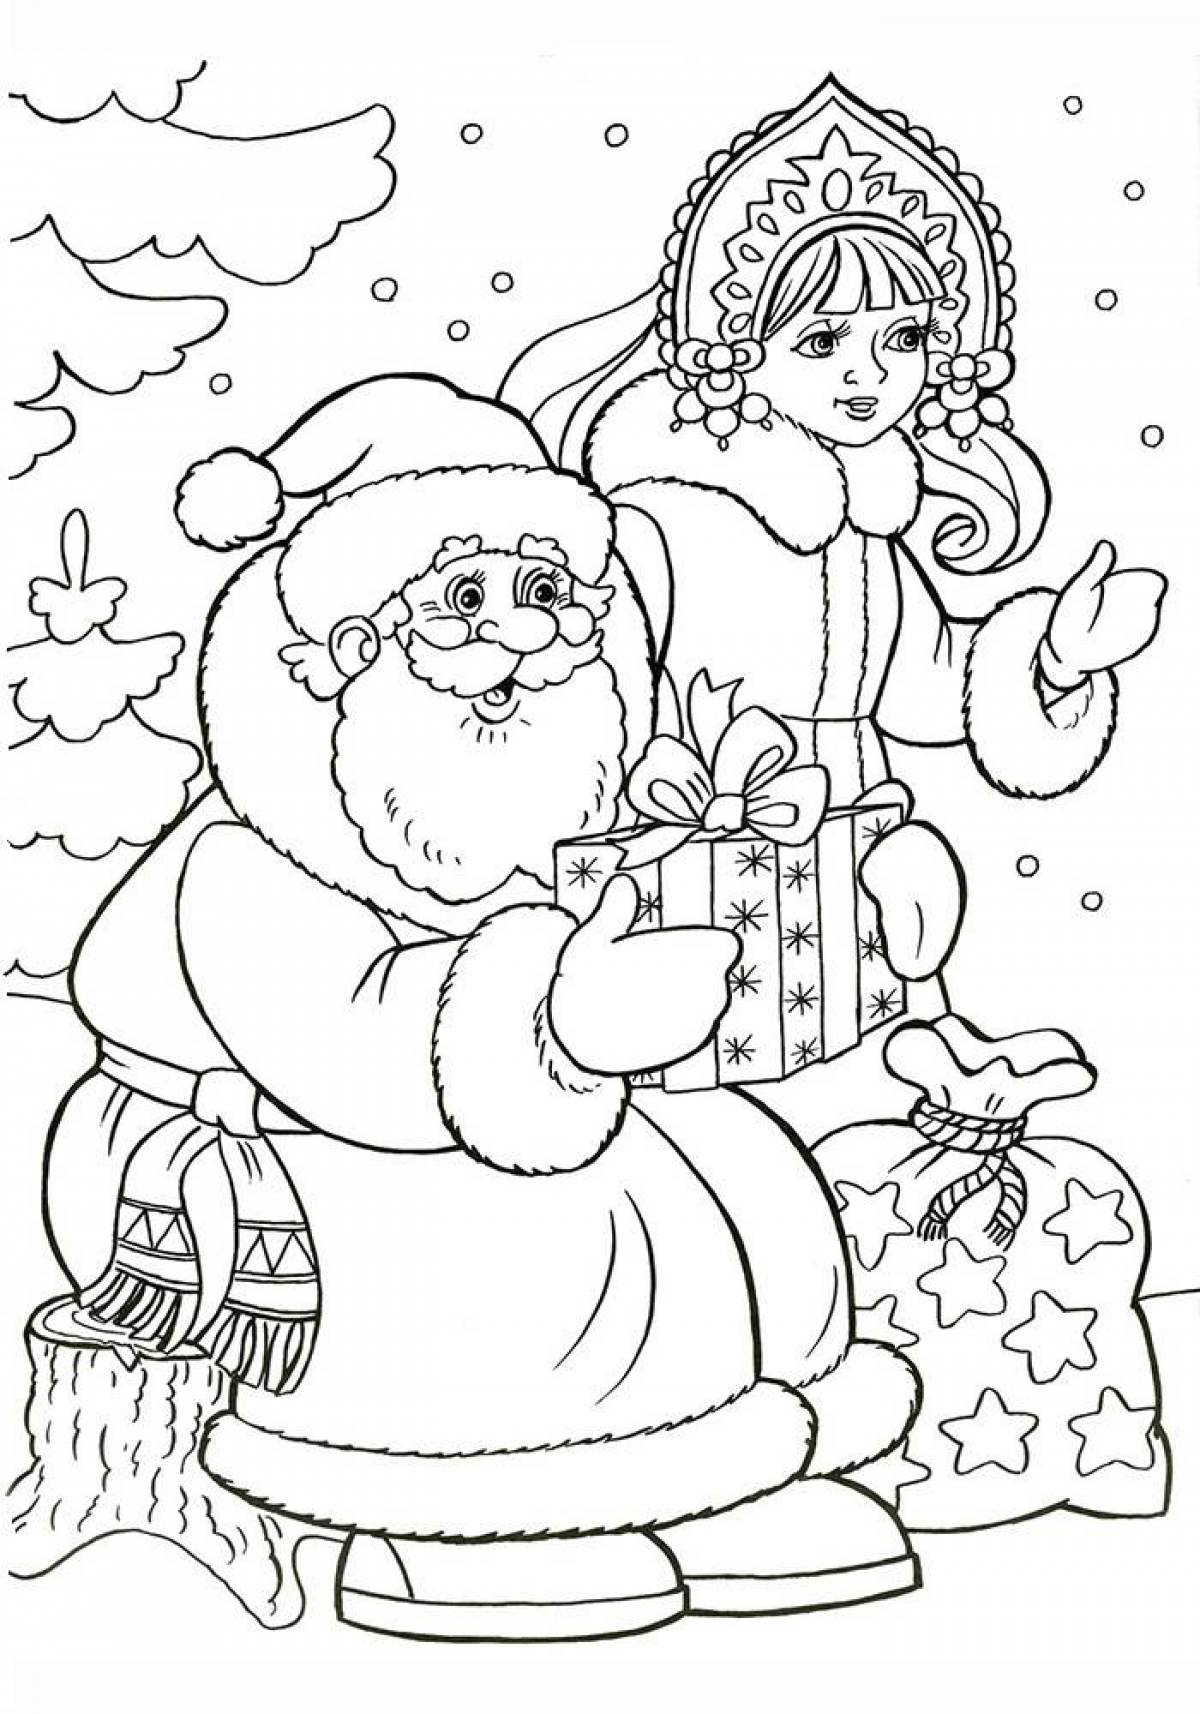 Santa Claus and Snow Maiden for kids #9